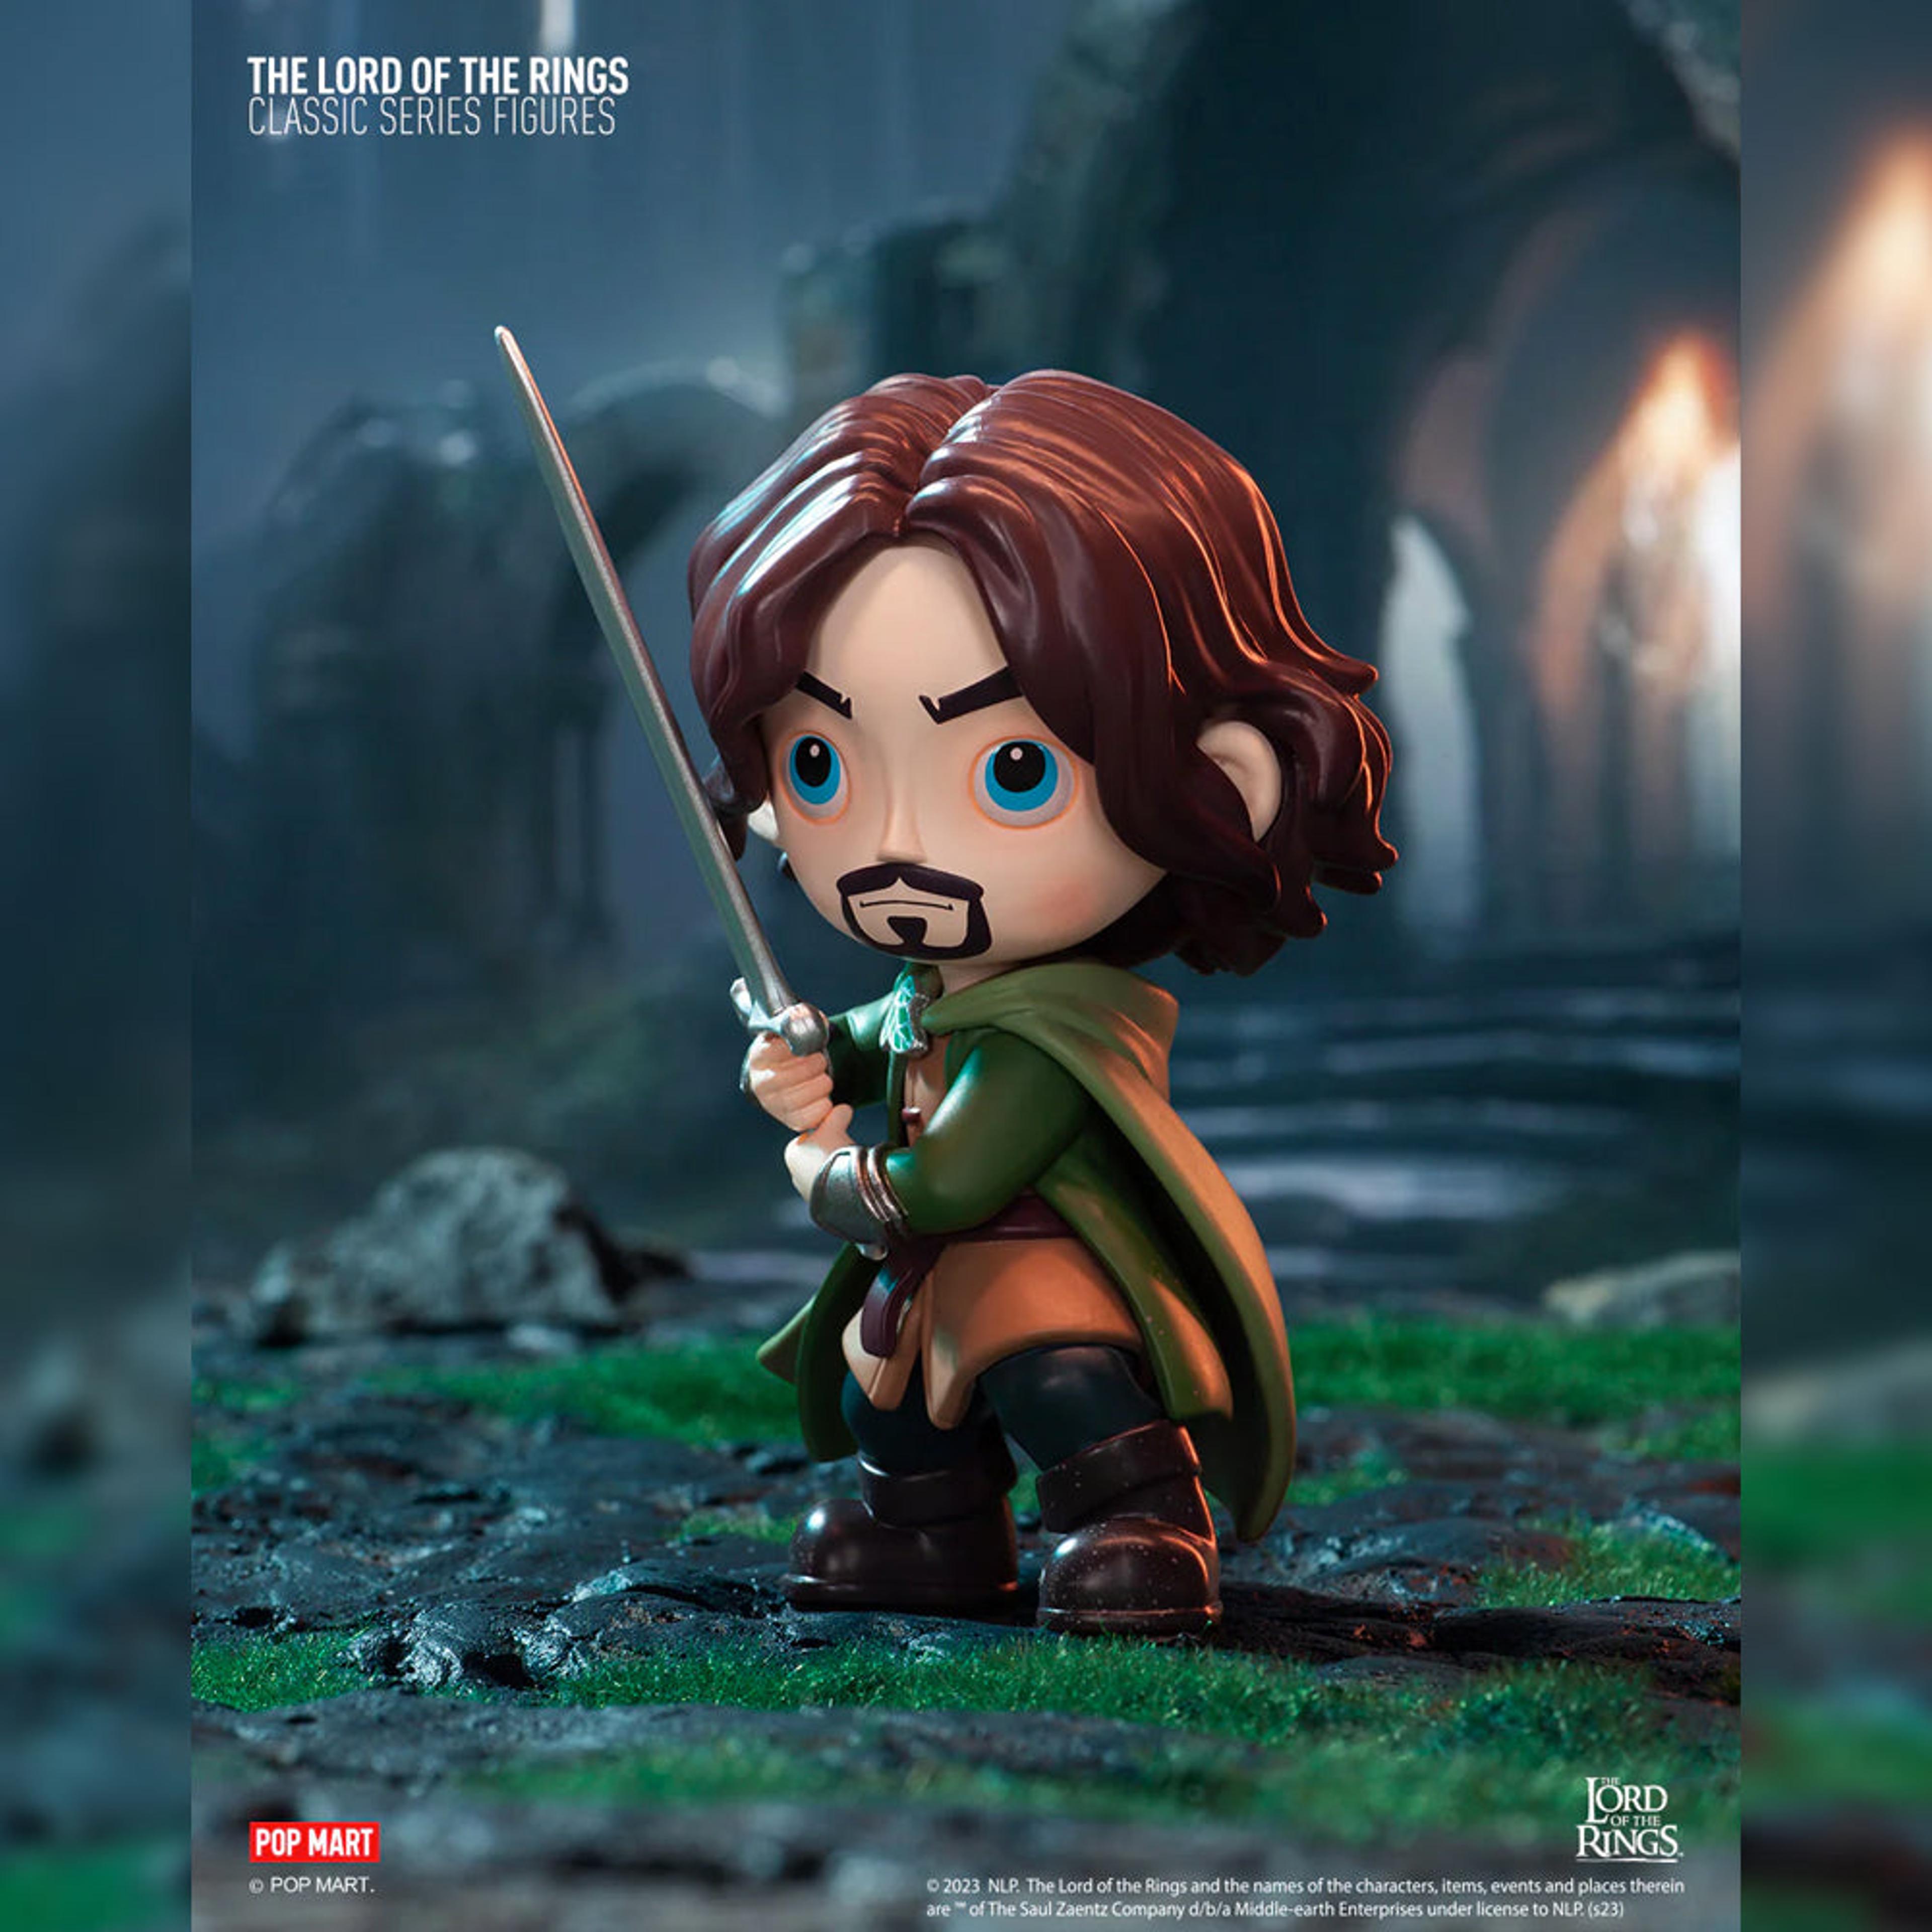 Alternate View 5 of The Lord of the Rings Classic Series Blind Box by POP MART